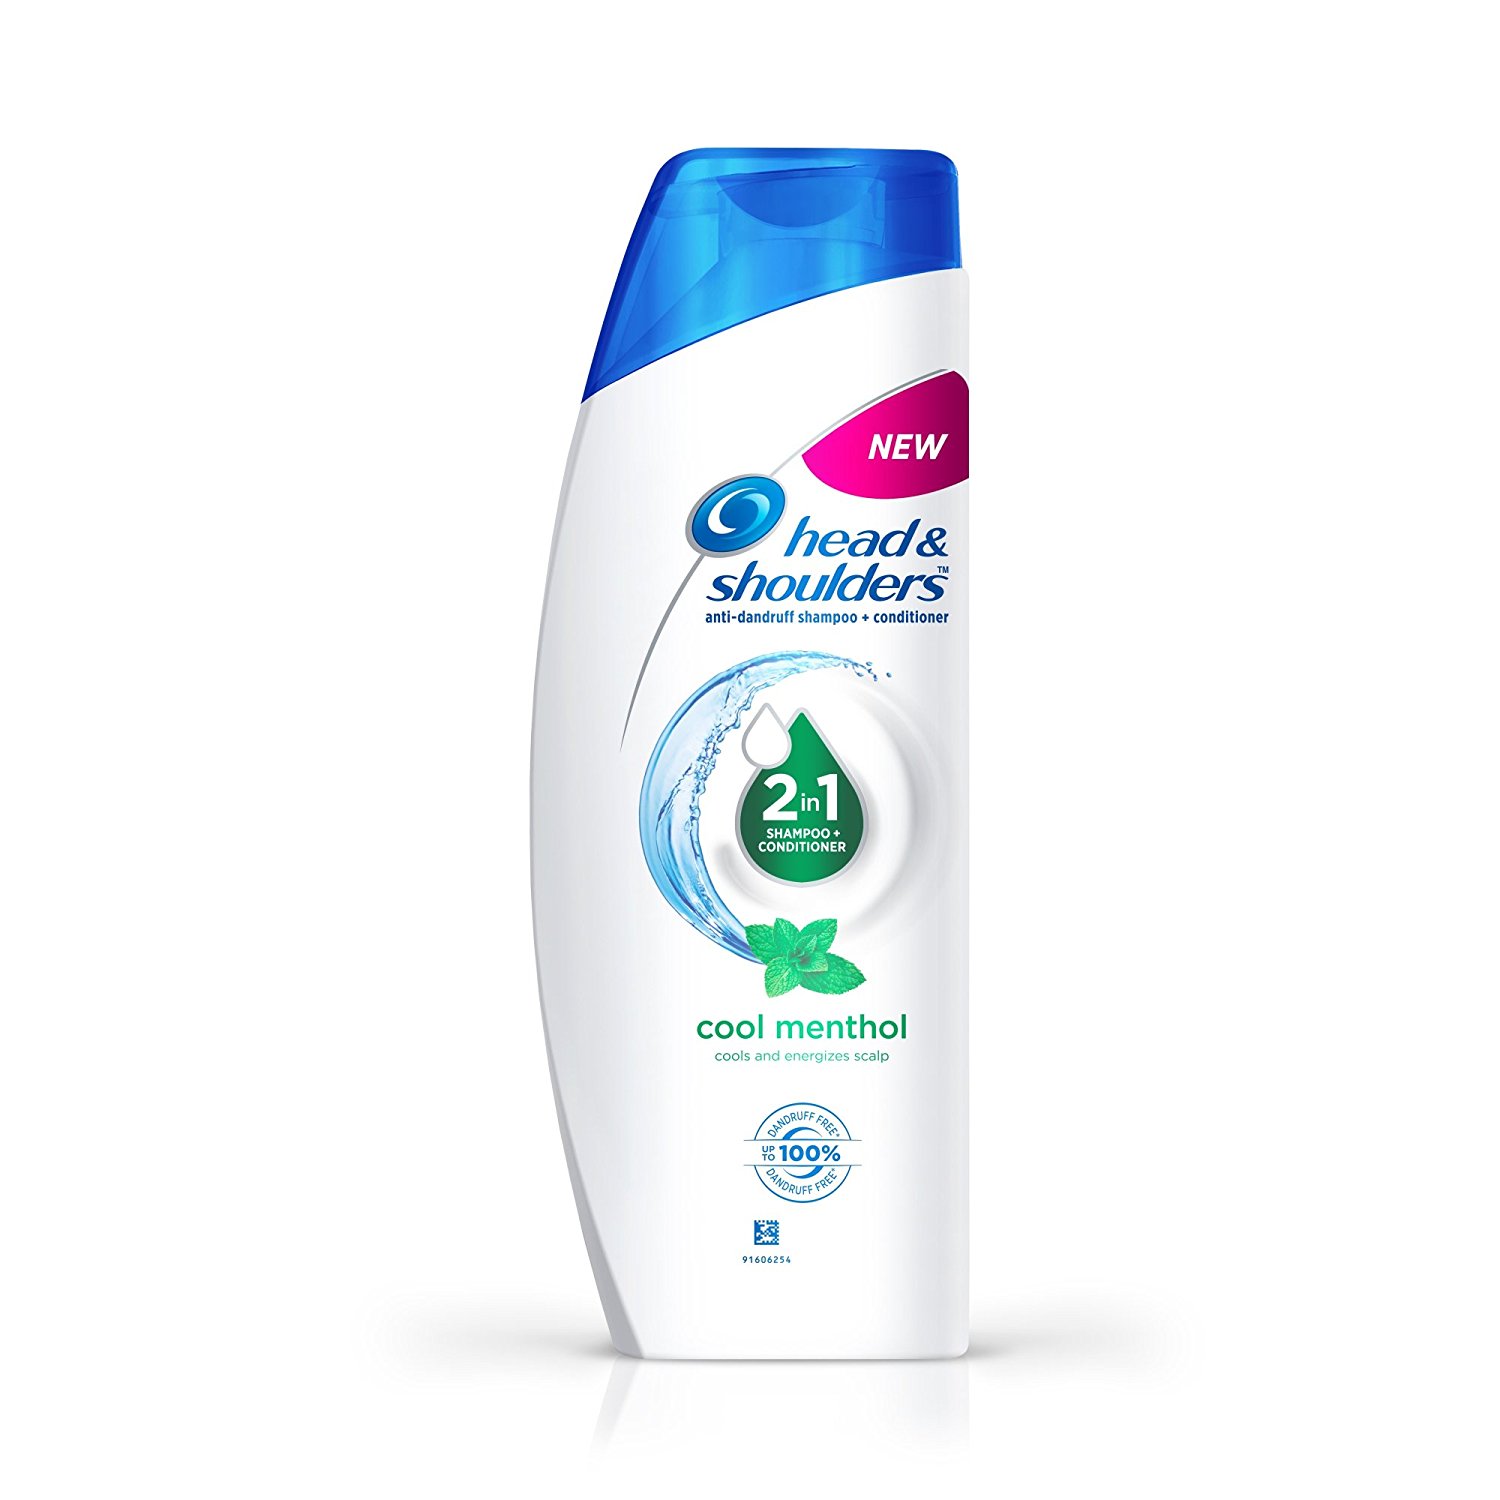 Head & Shoulders 2-in-1 Shampoo + Conditioner, Cool Menthol, 200ml